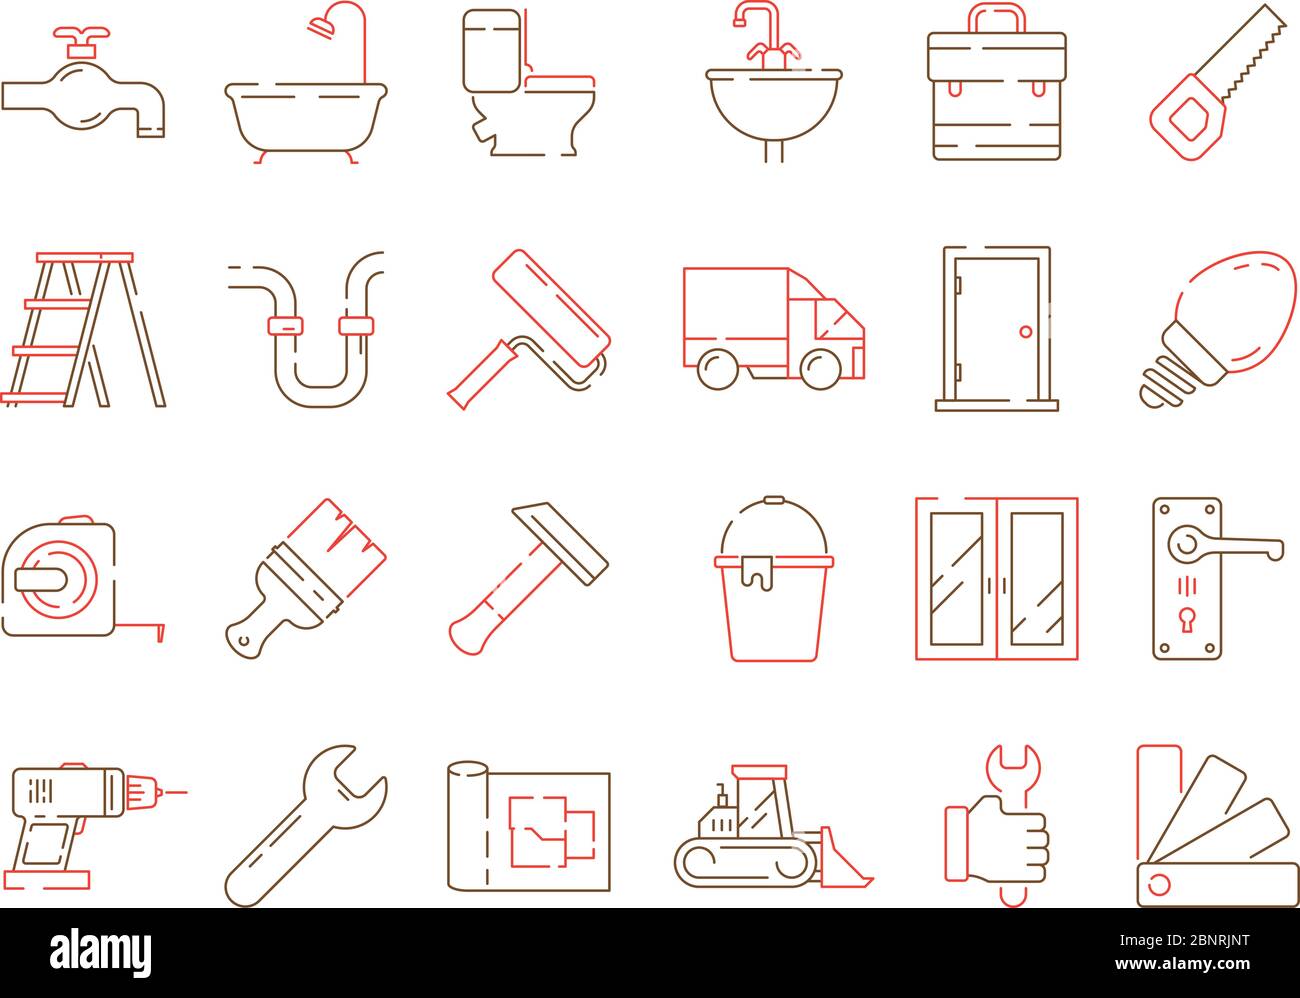 Construction equipment icon. Building home repair support service brickwork builder items vector collection Stock Vector